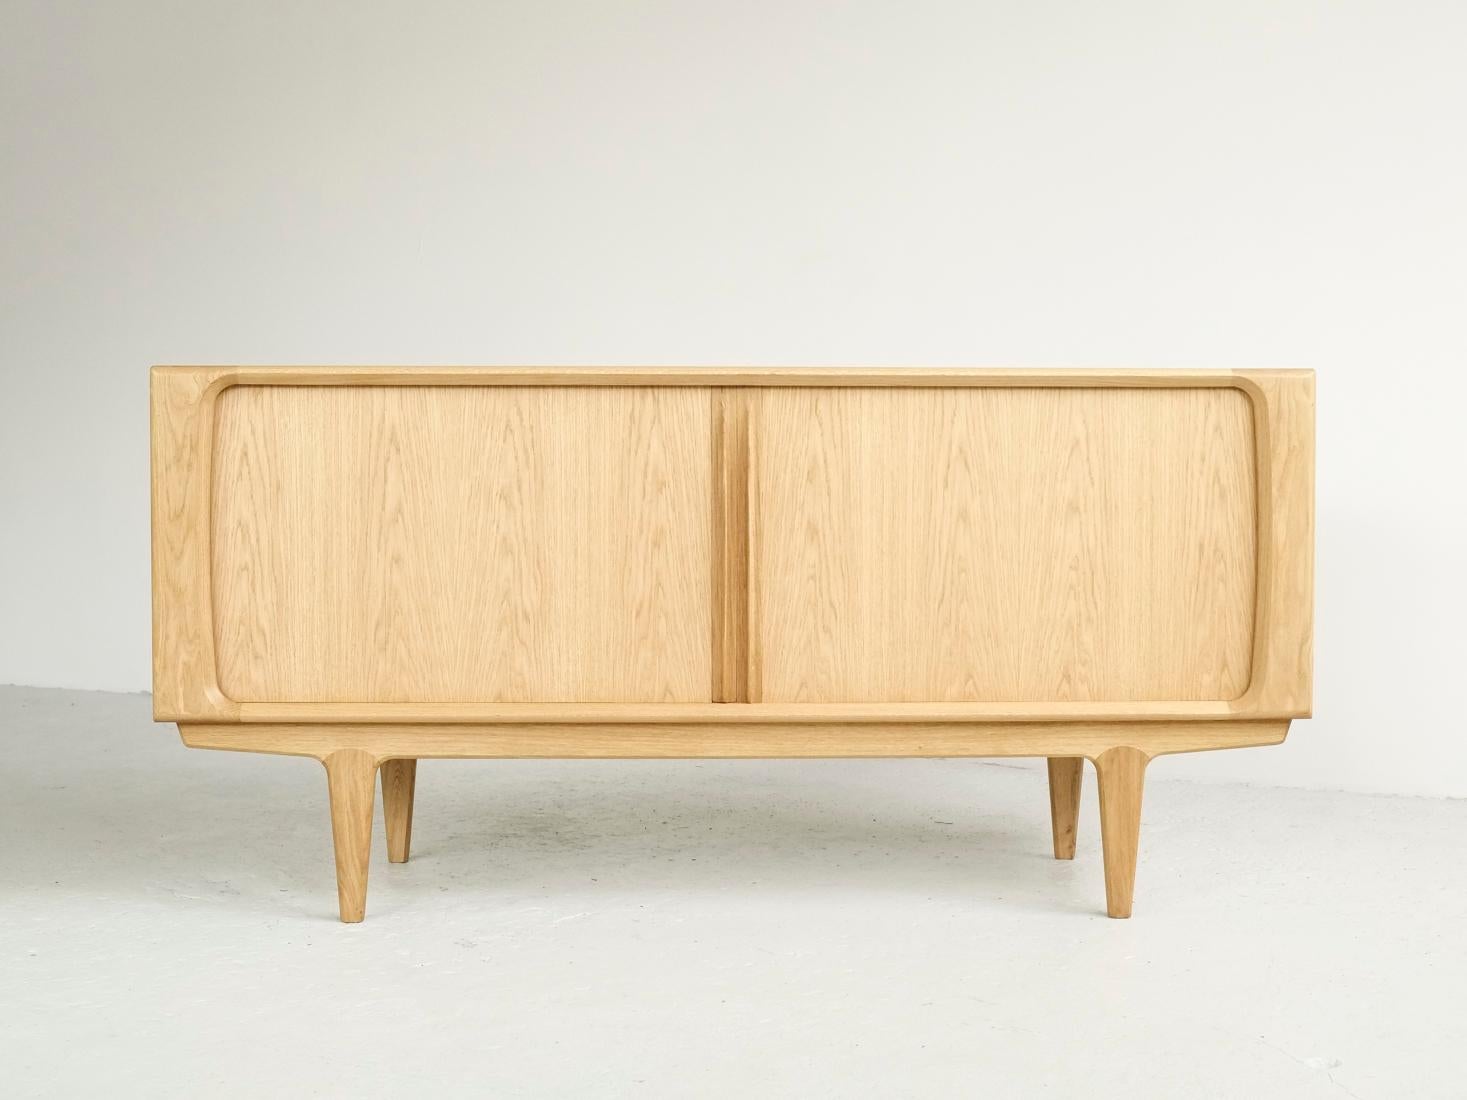 Sideboard model no. 142 was originally designed by Bernhard Pedersen in 1965 in Denmark. Today it is newly manufactured by the same company: Bernhard Pedersen & Søn in Denmark. It is a true piece of craftsmanship and it is made according to the